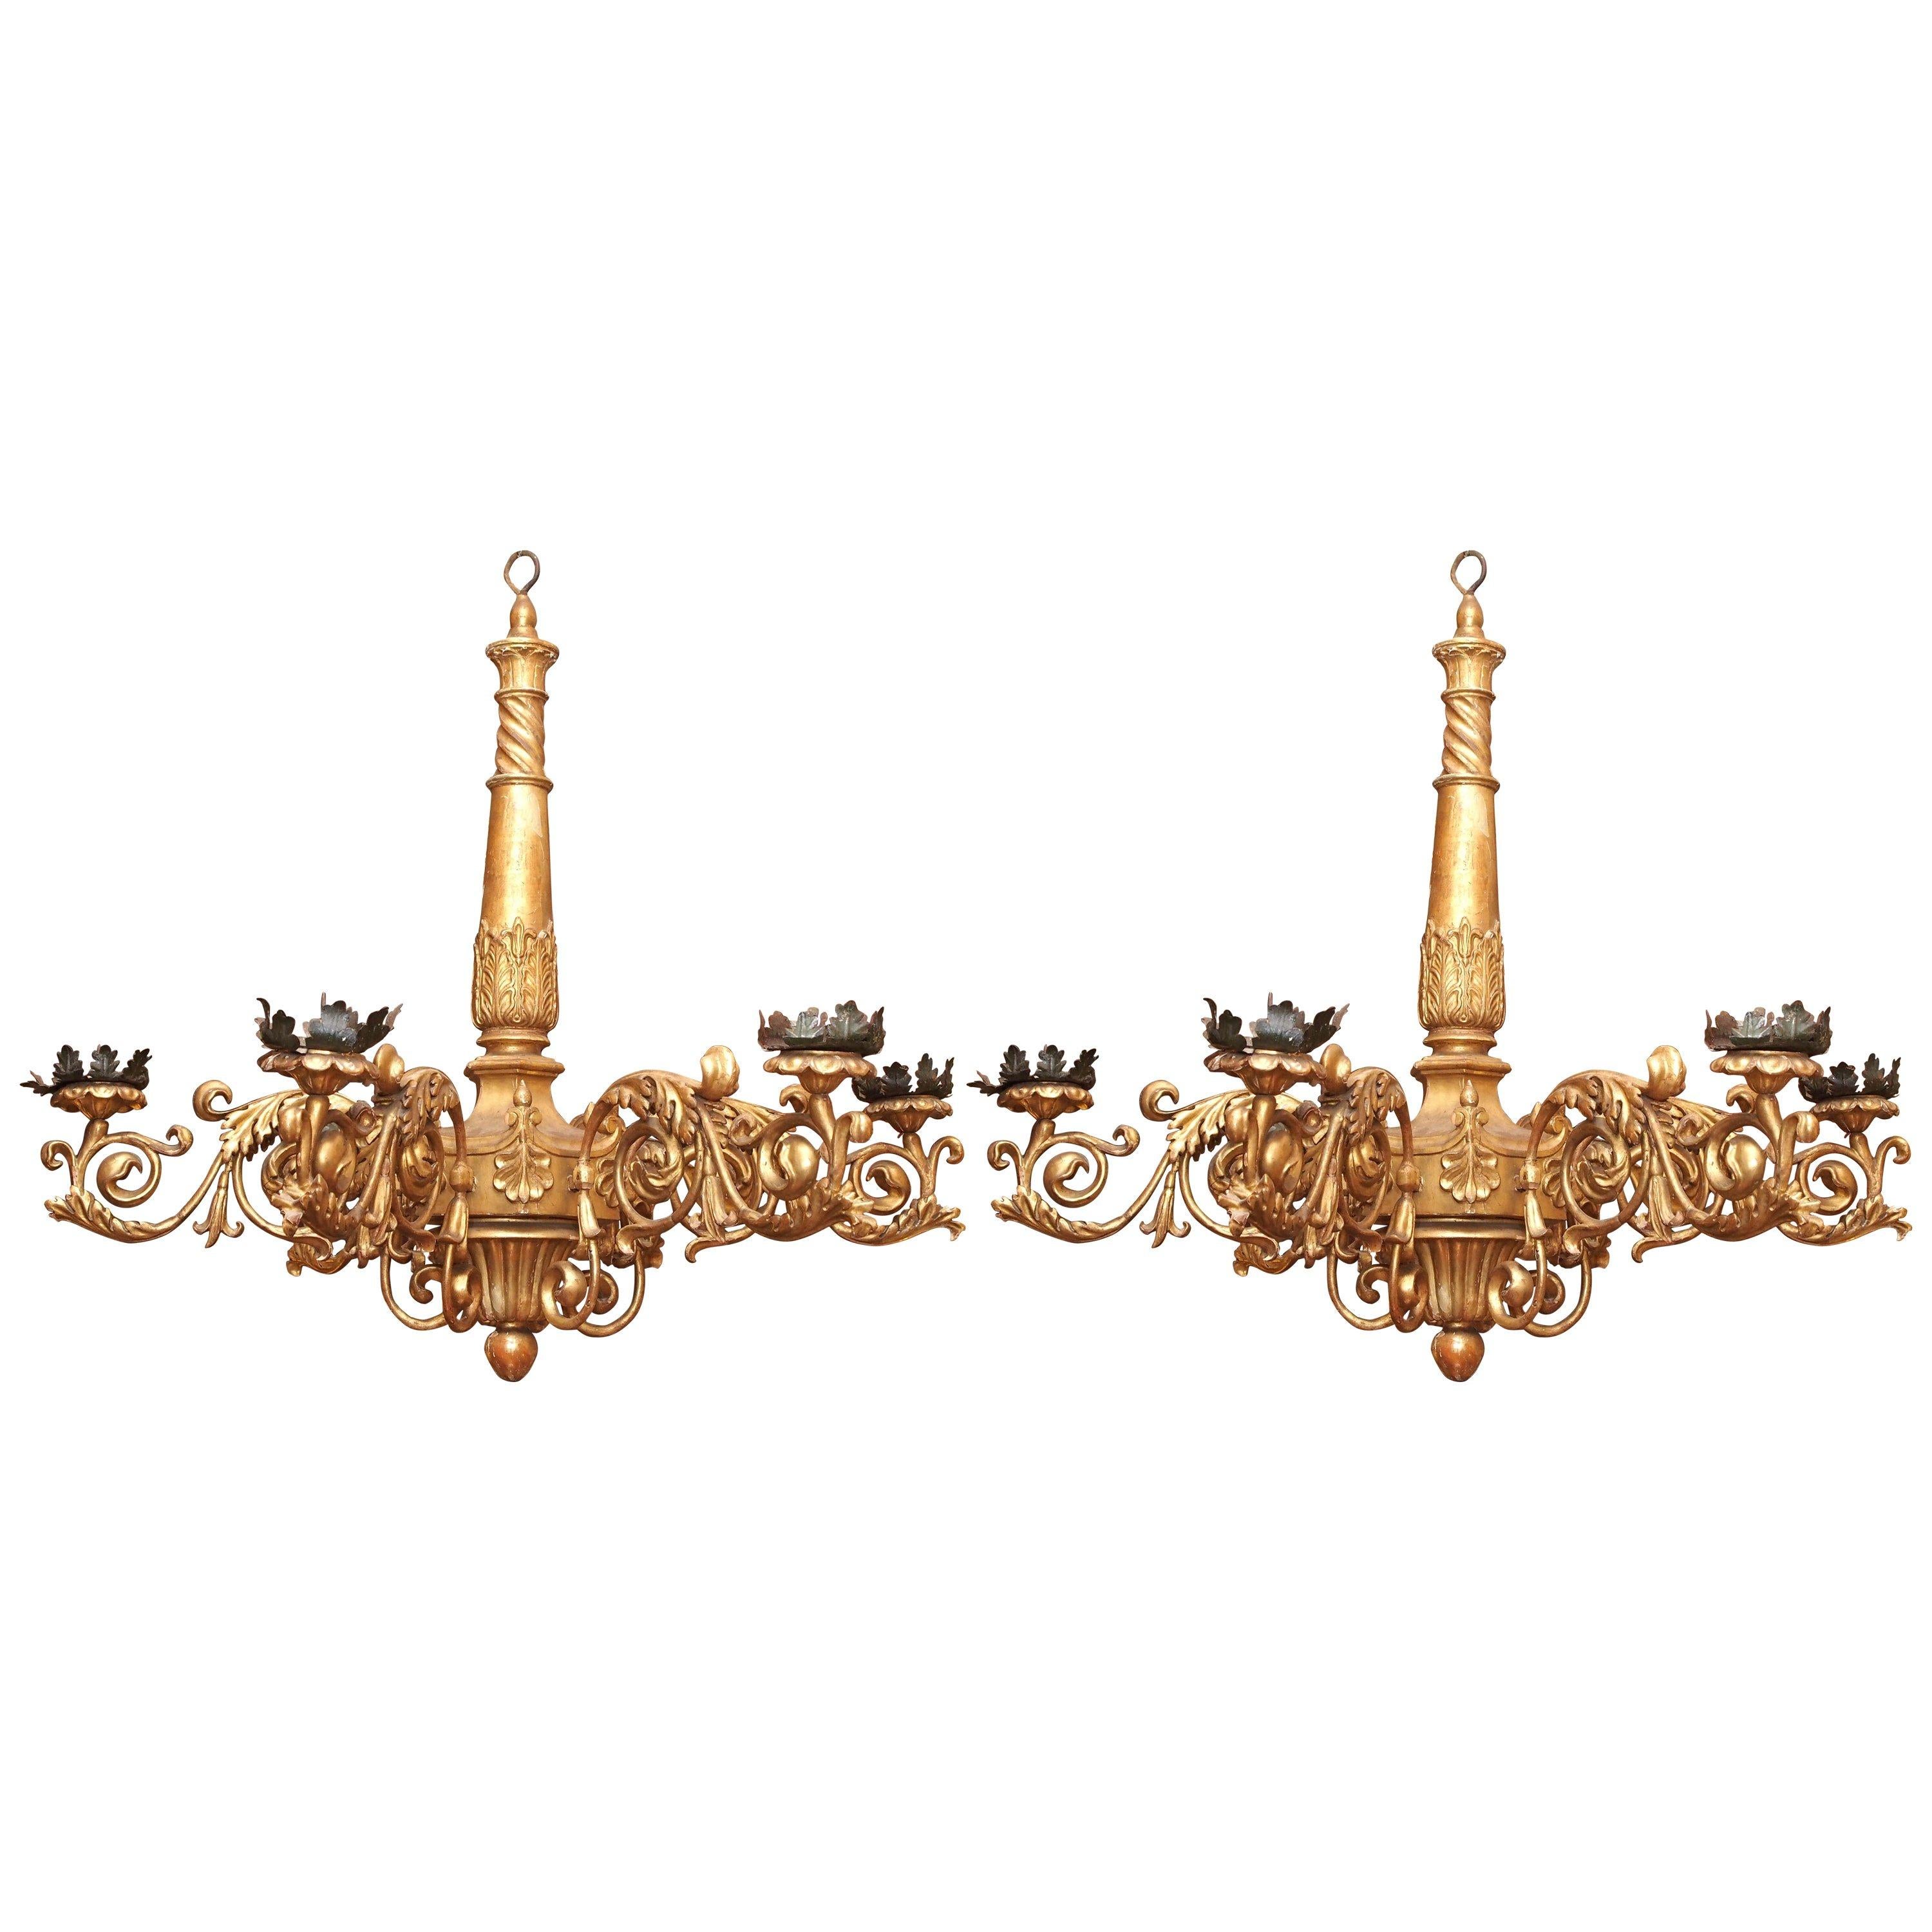 Pair of Italian Giltwood Regence Style Chandeliers For Sale